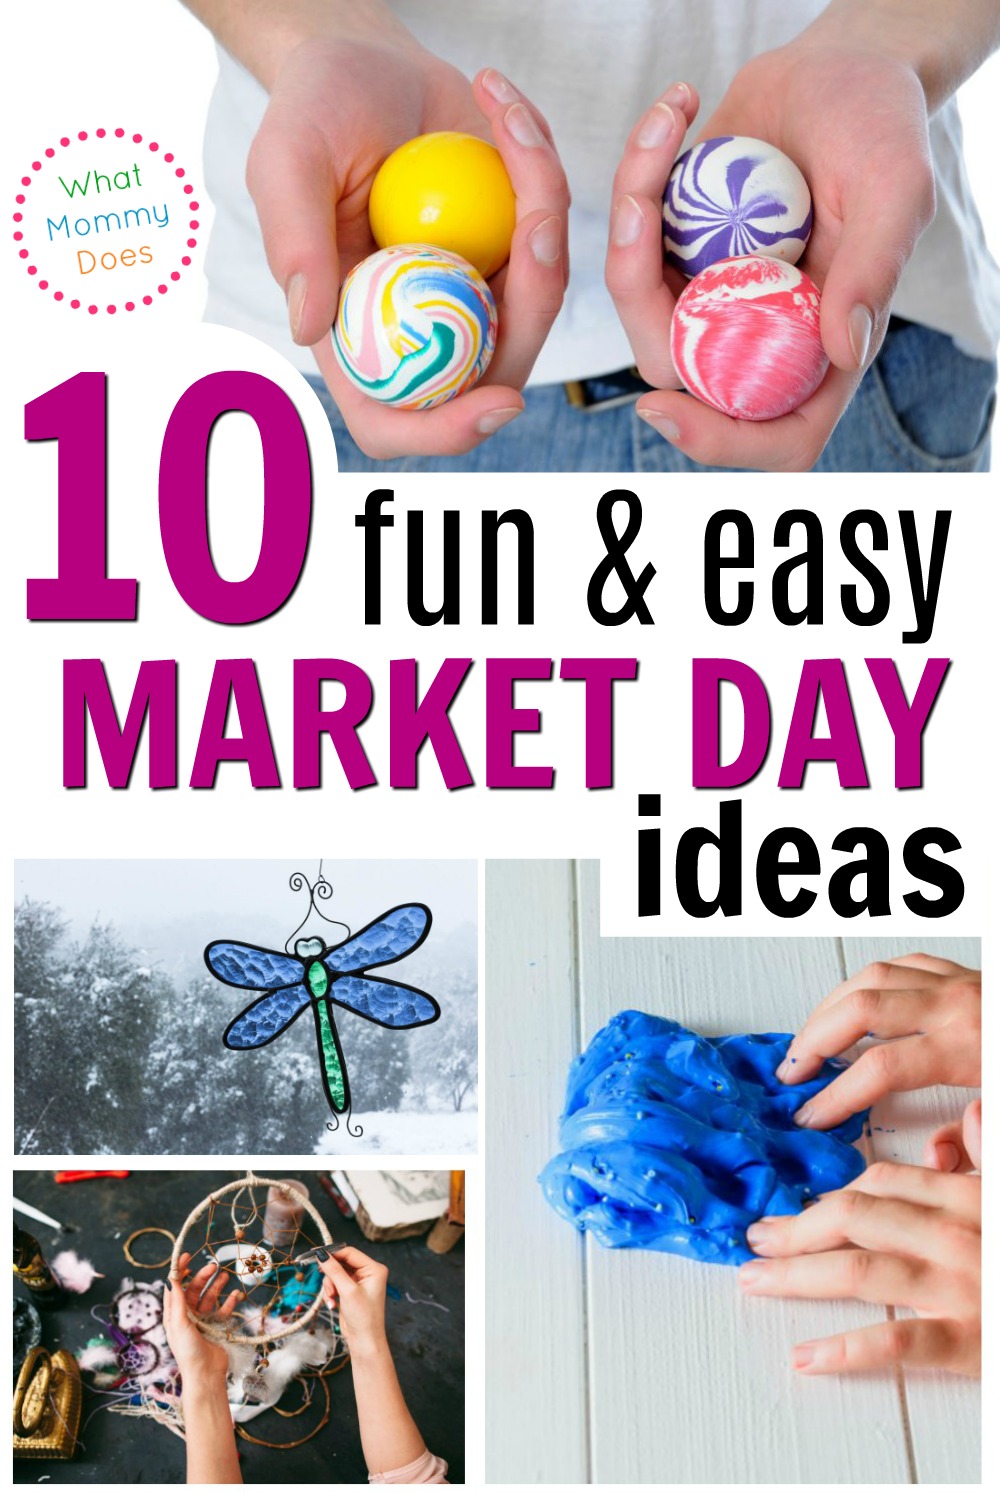 10 Easy School Market Day Ideas to Make and Sell - What Mommy Does